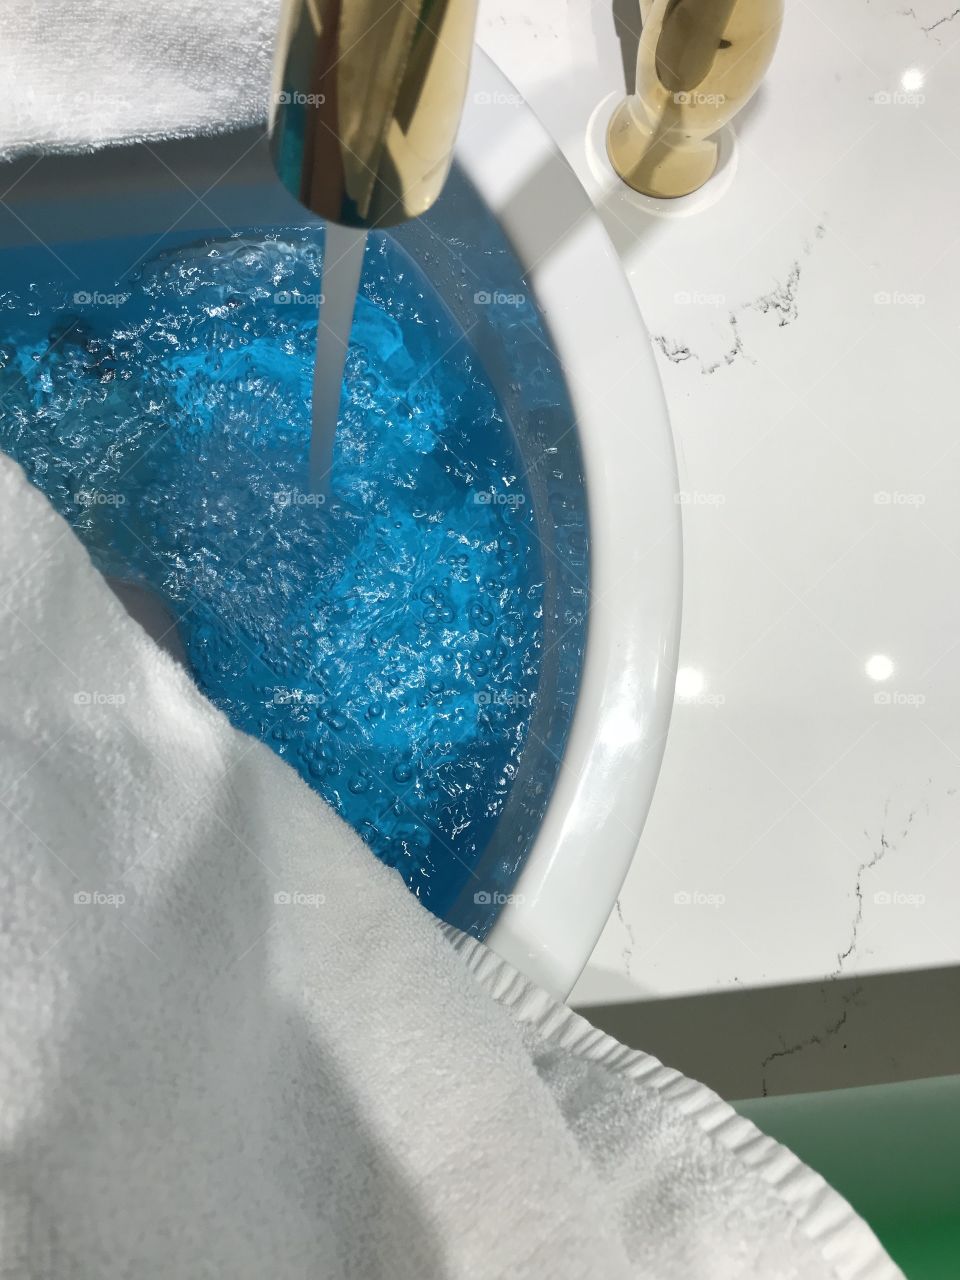 Hot bubbly water for a perfect relaxing spa day. I love treating myself to Pedicures.